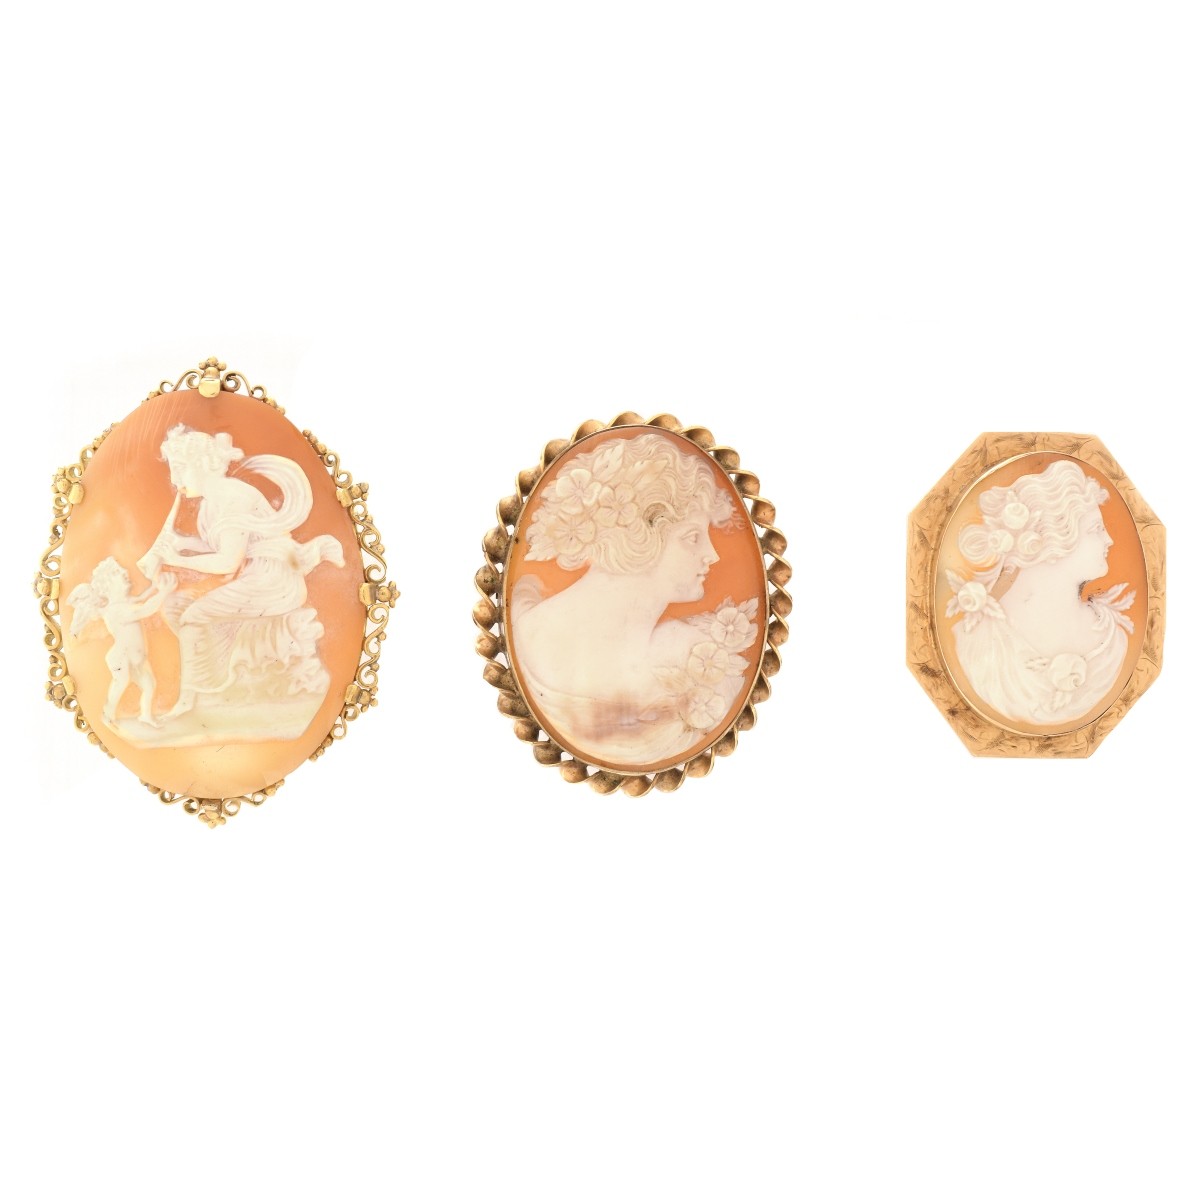 Three Antique Shell Cameo Brooches